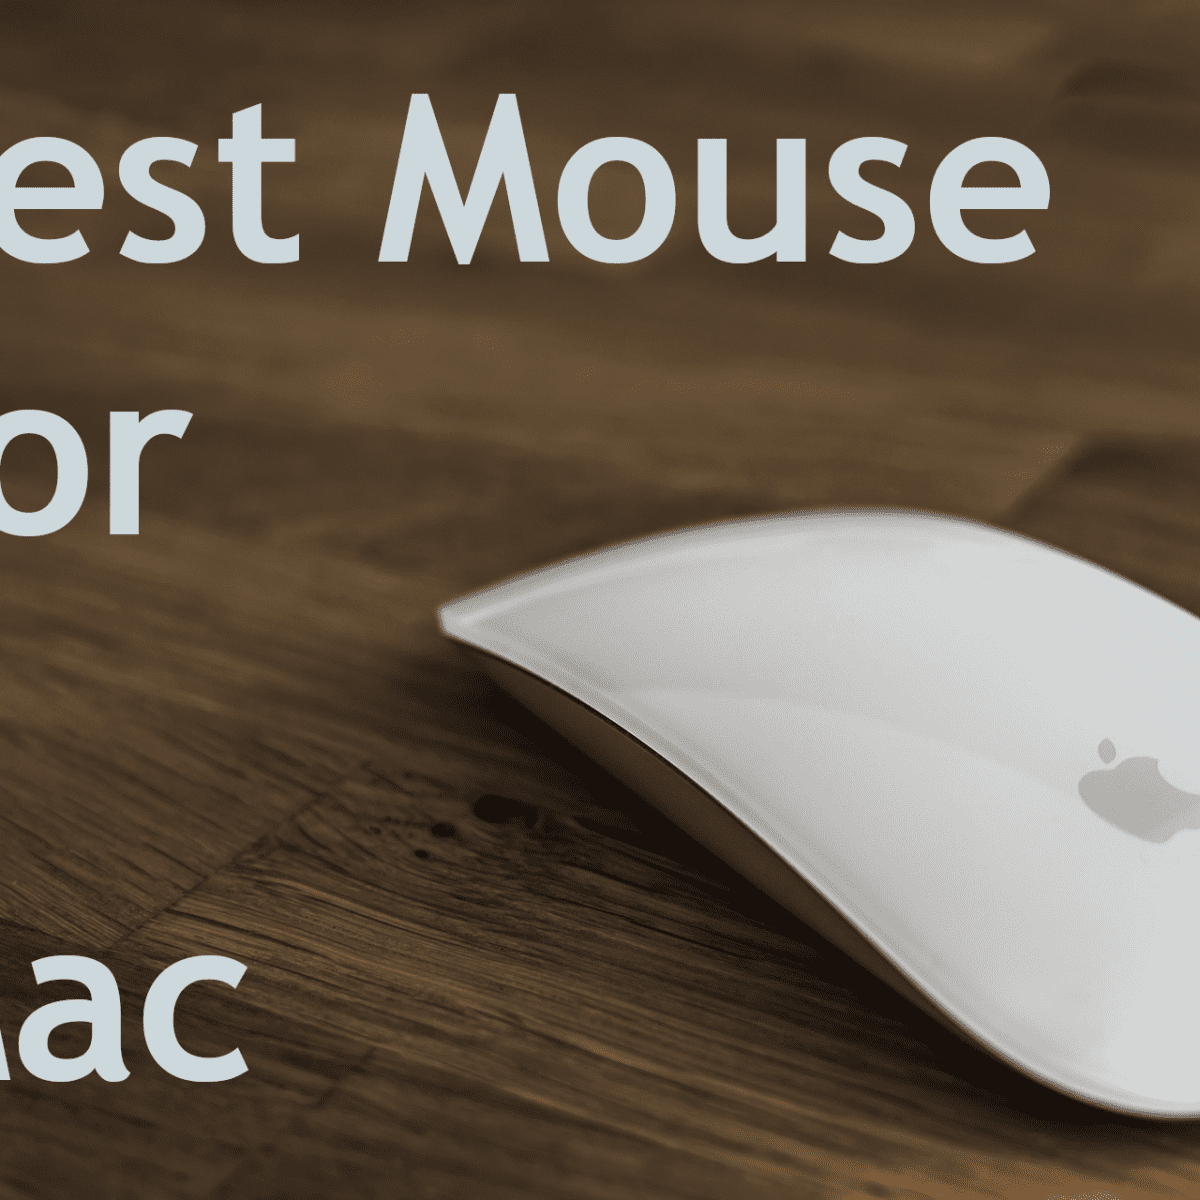 mac airbook mouse